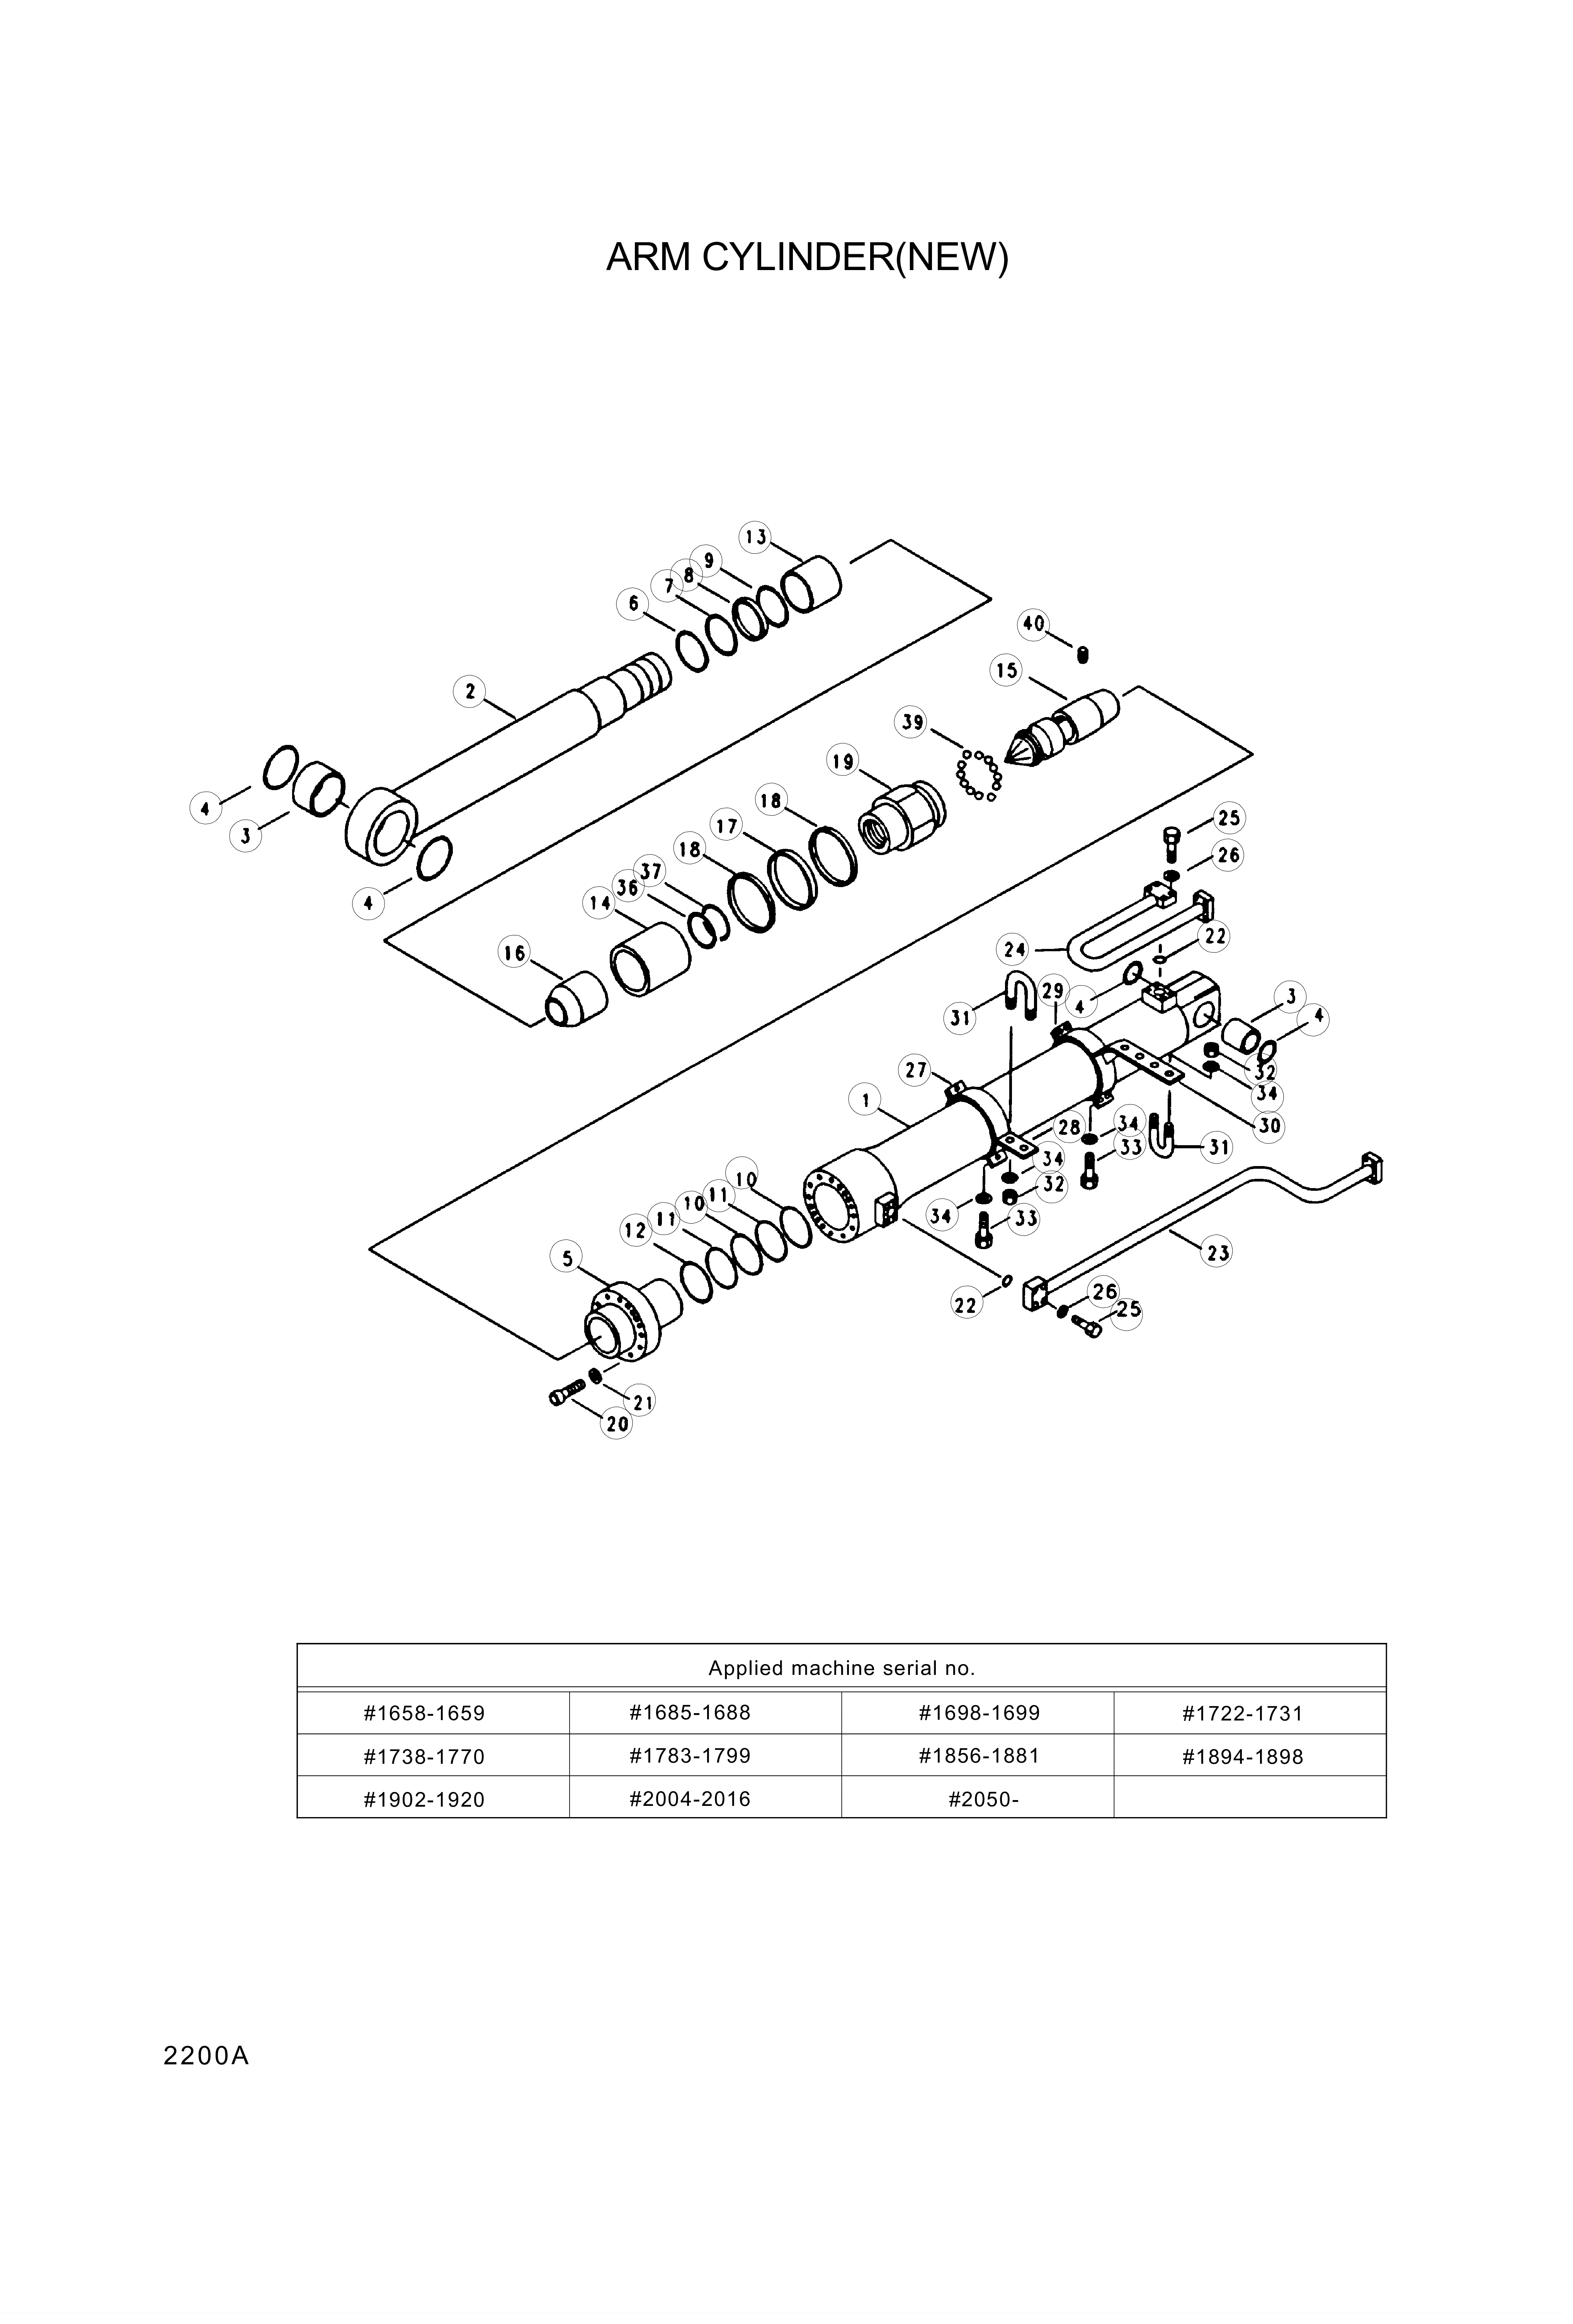 drawing for Hyundai Construction Equipment 000008 - BAND (figure 1)